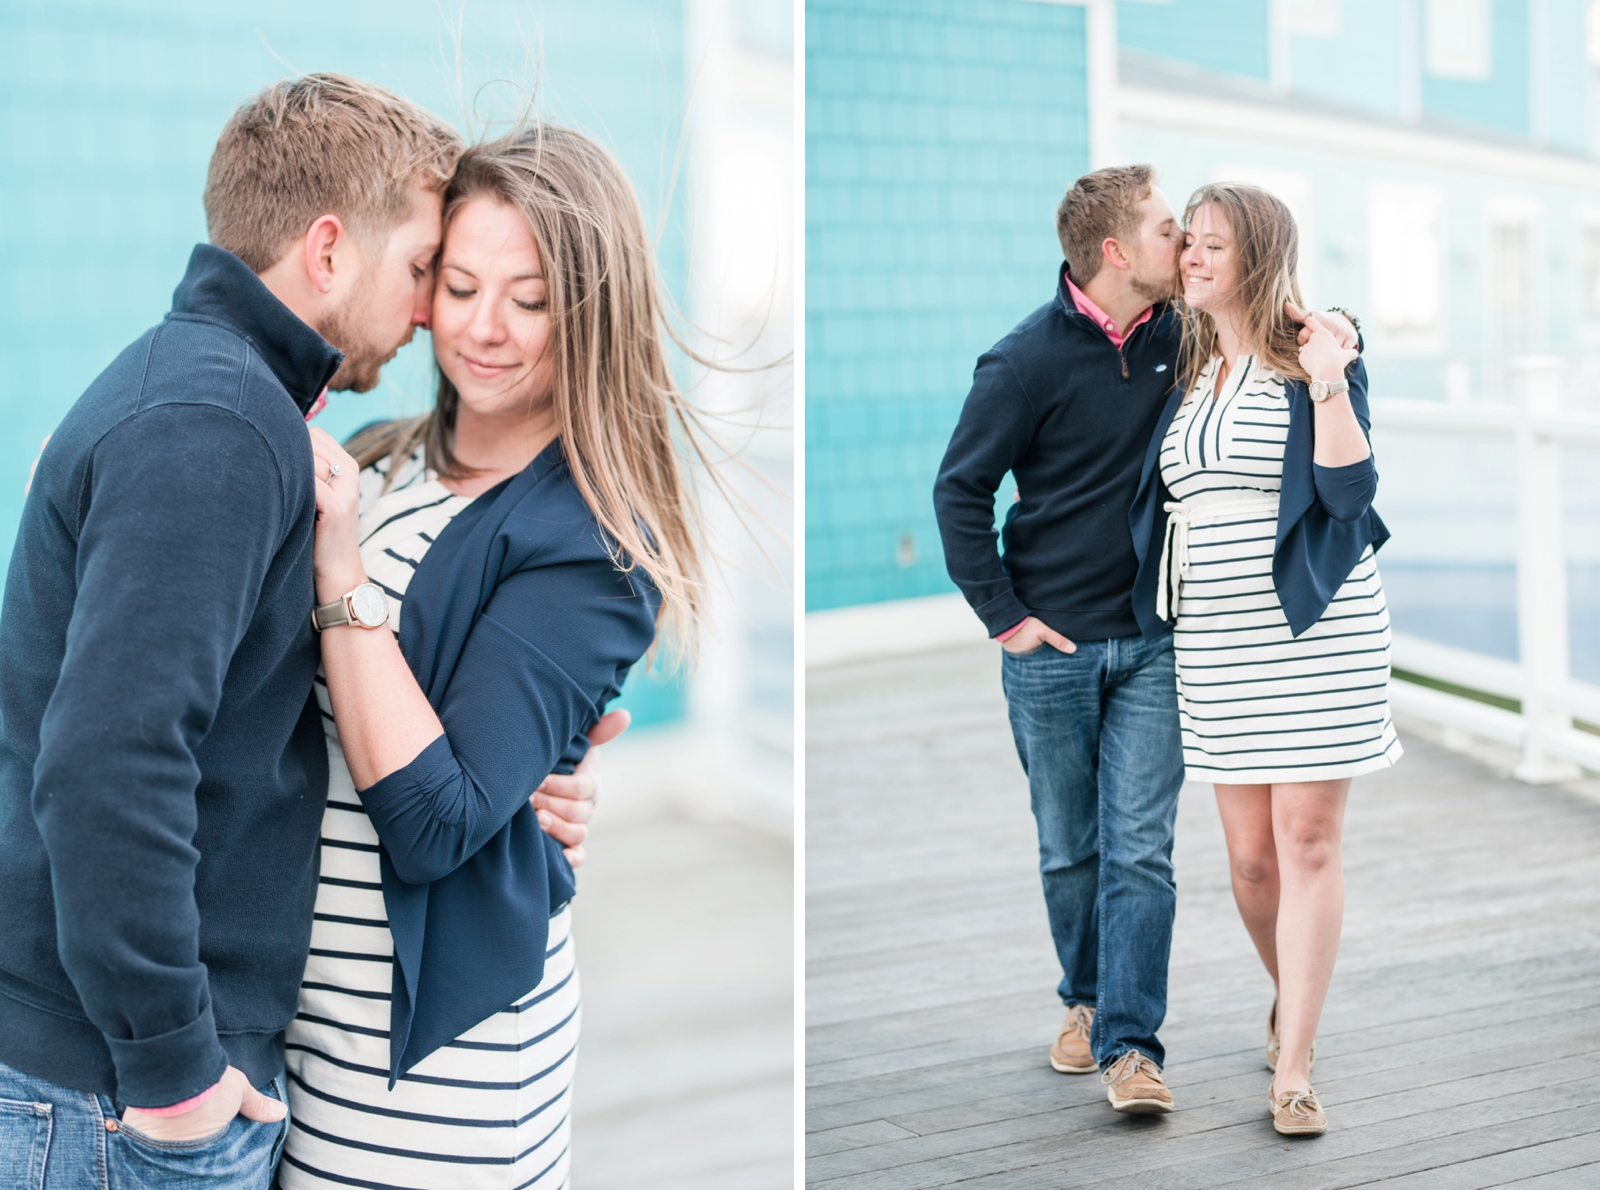 cape-charles-eastern-shore-waterfront-engagement-session-photo_7256.jpg